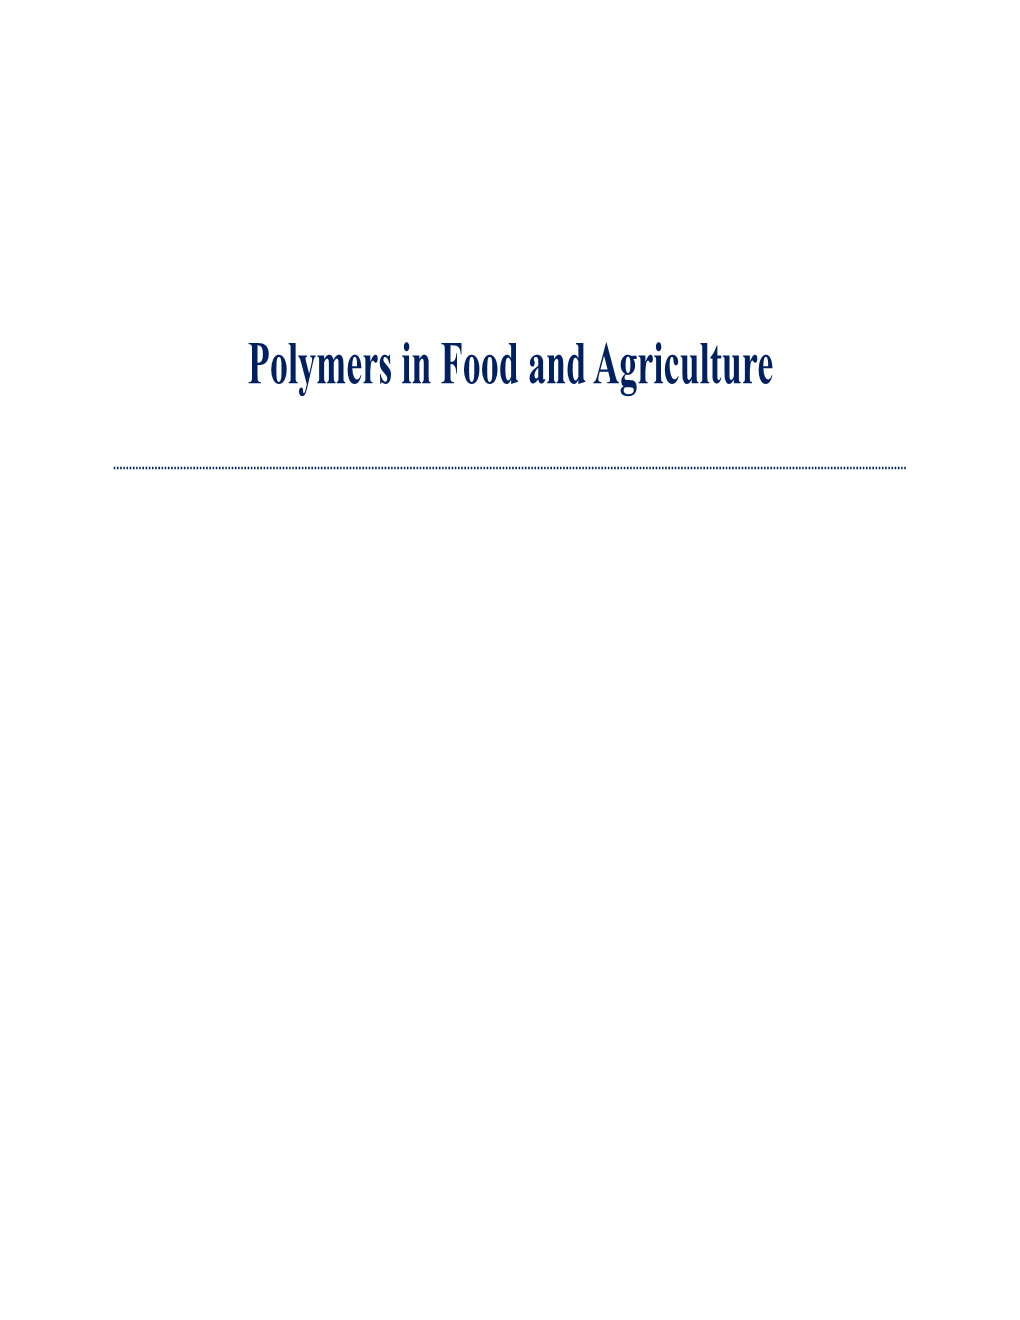 Polymers in Food and Agriculture